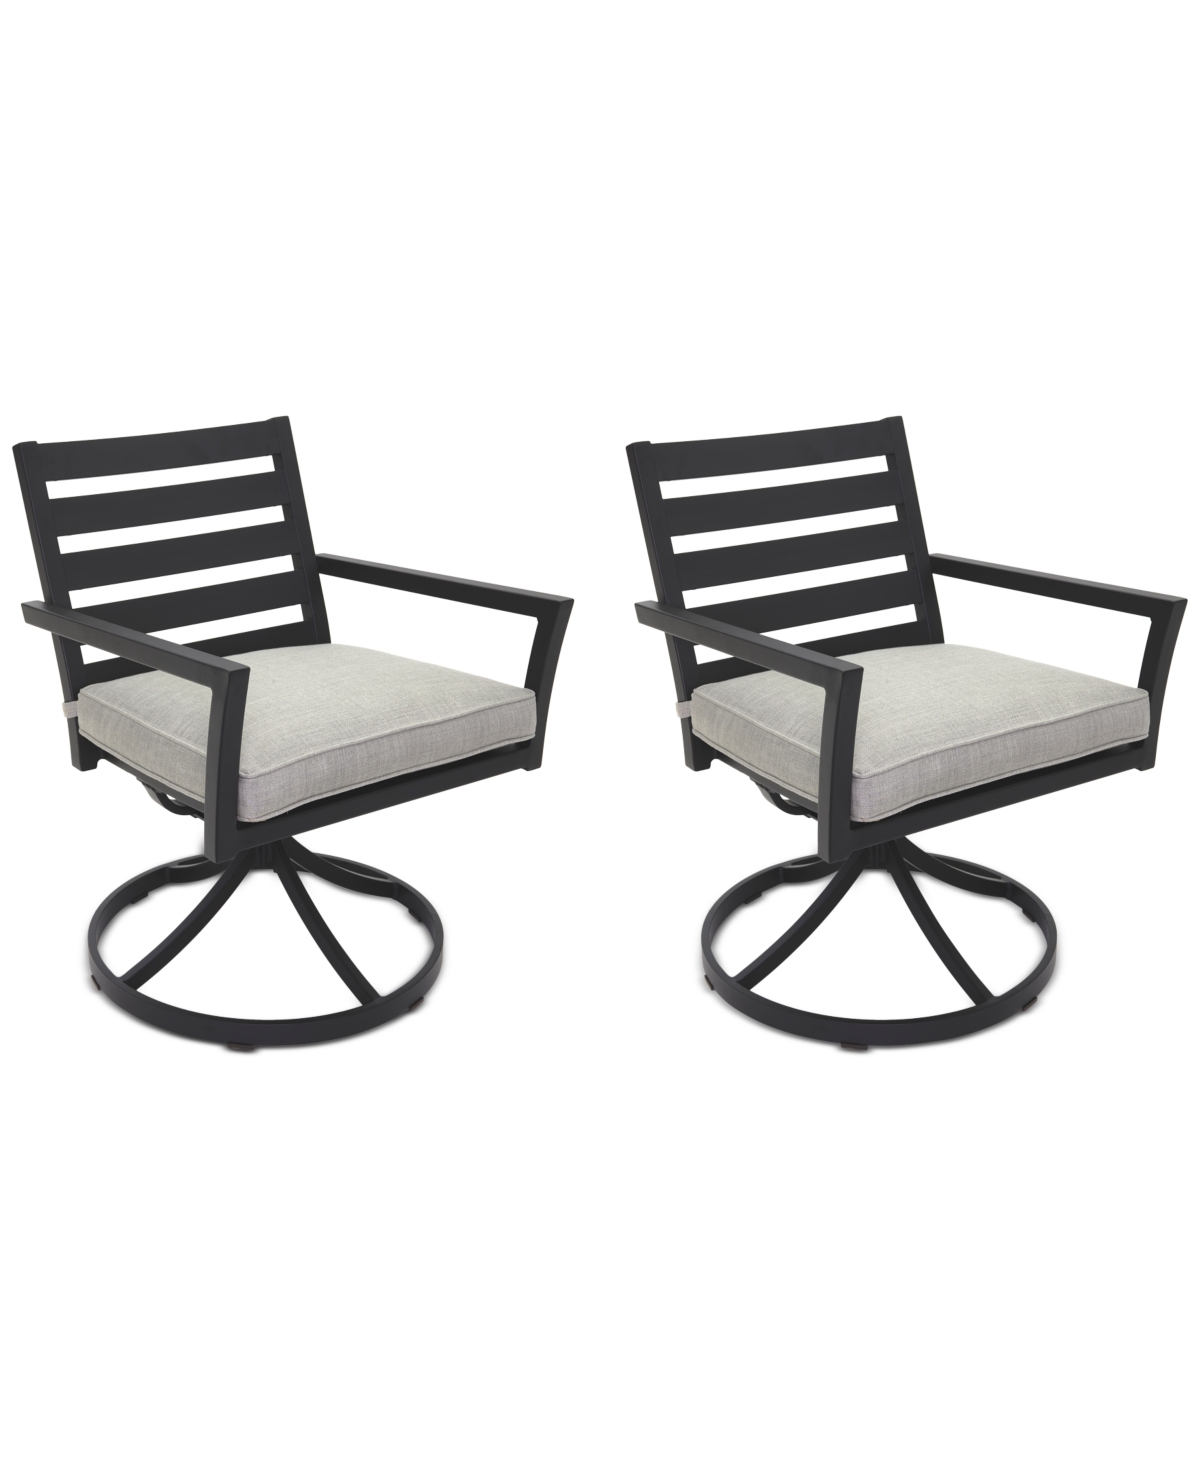 Agio Astaire Outdoor 2-pc Swivel Chair Bundle Set In Oyster Light Grey